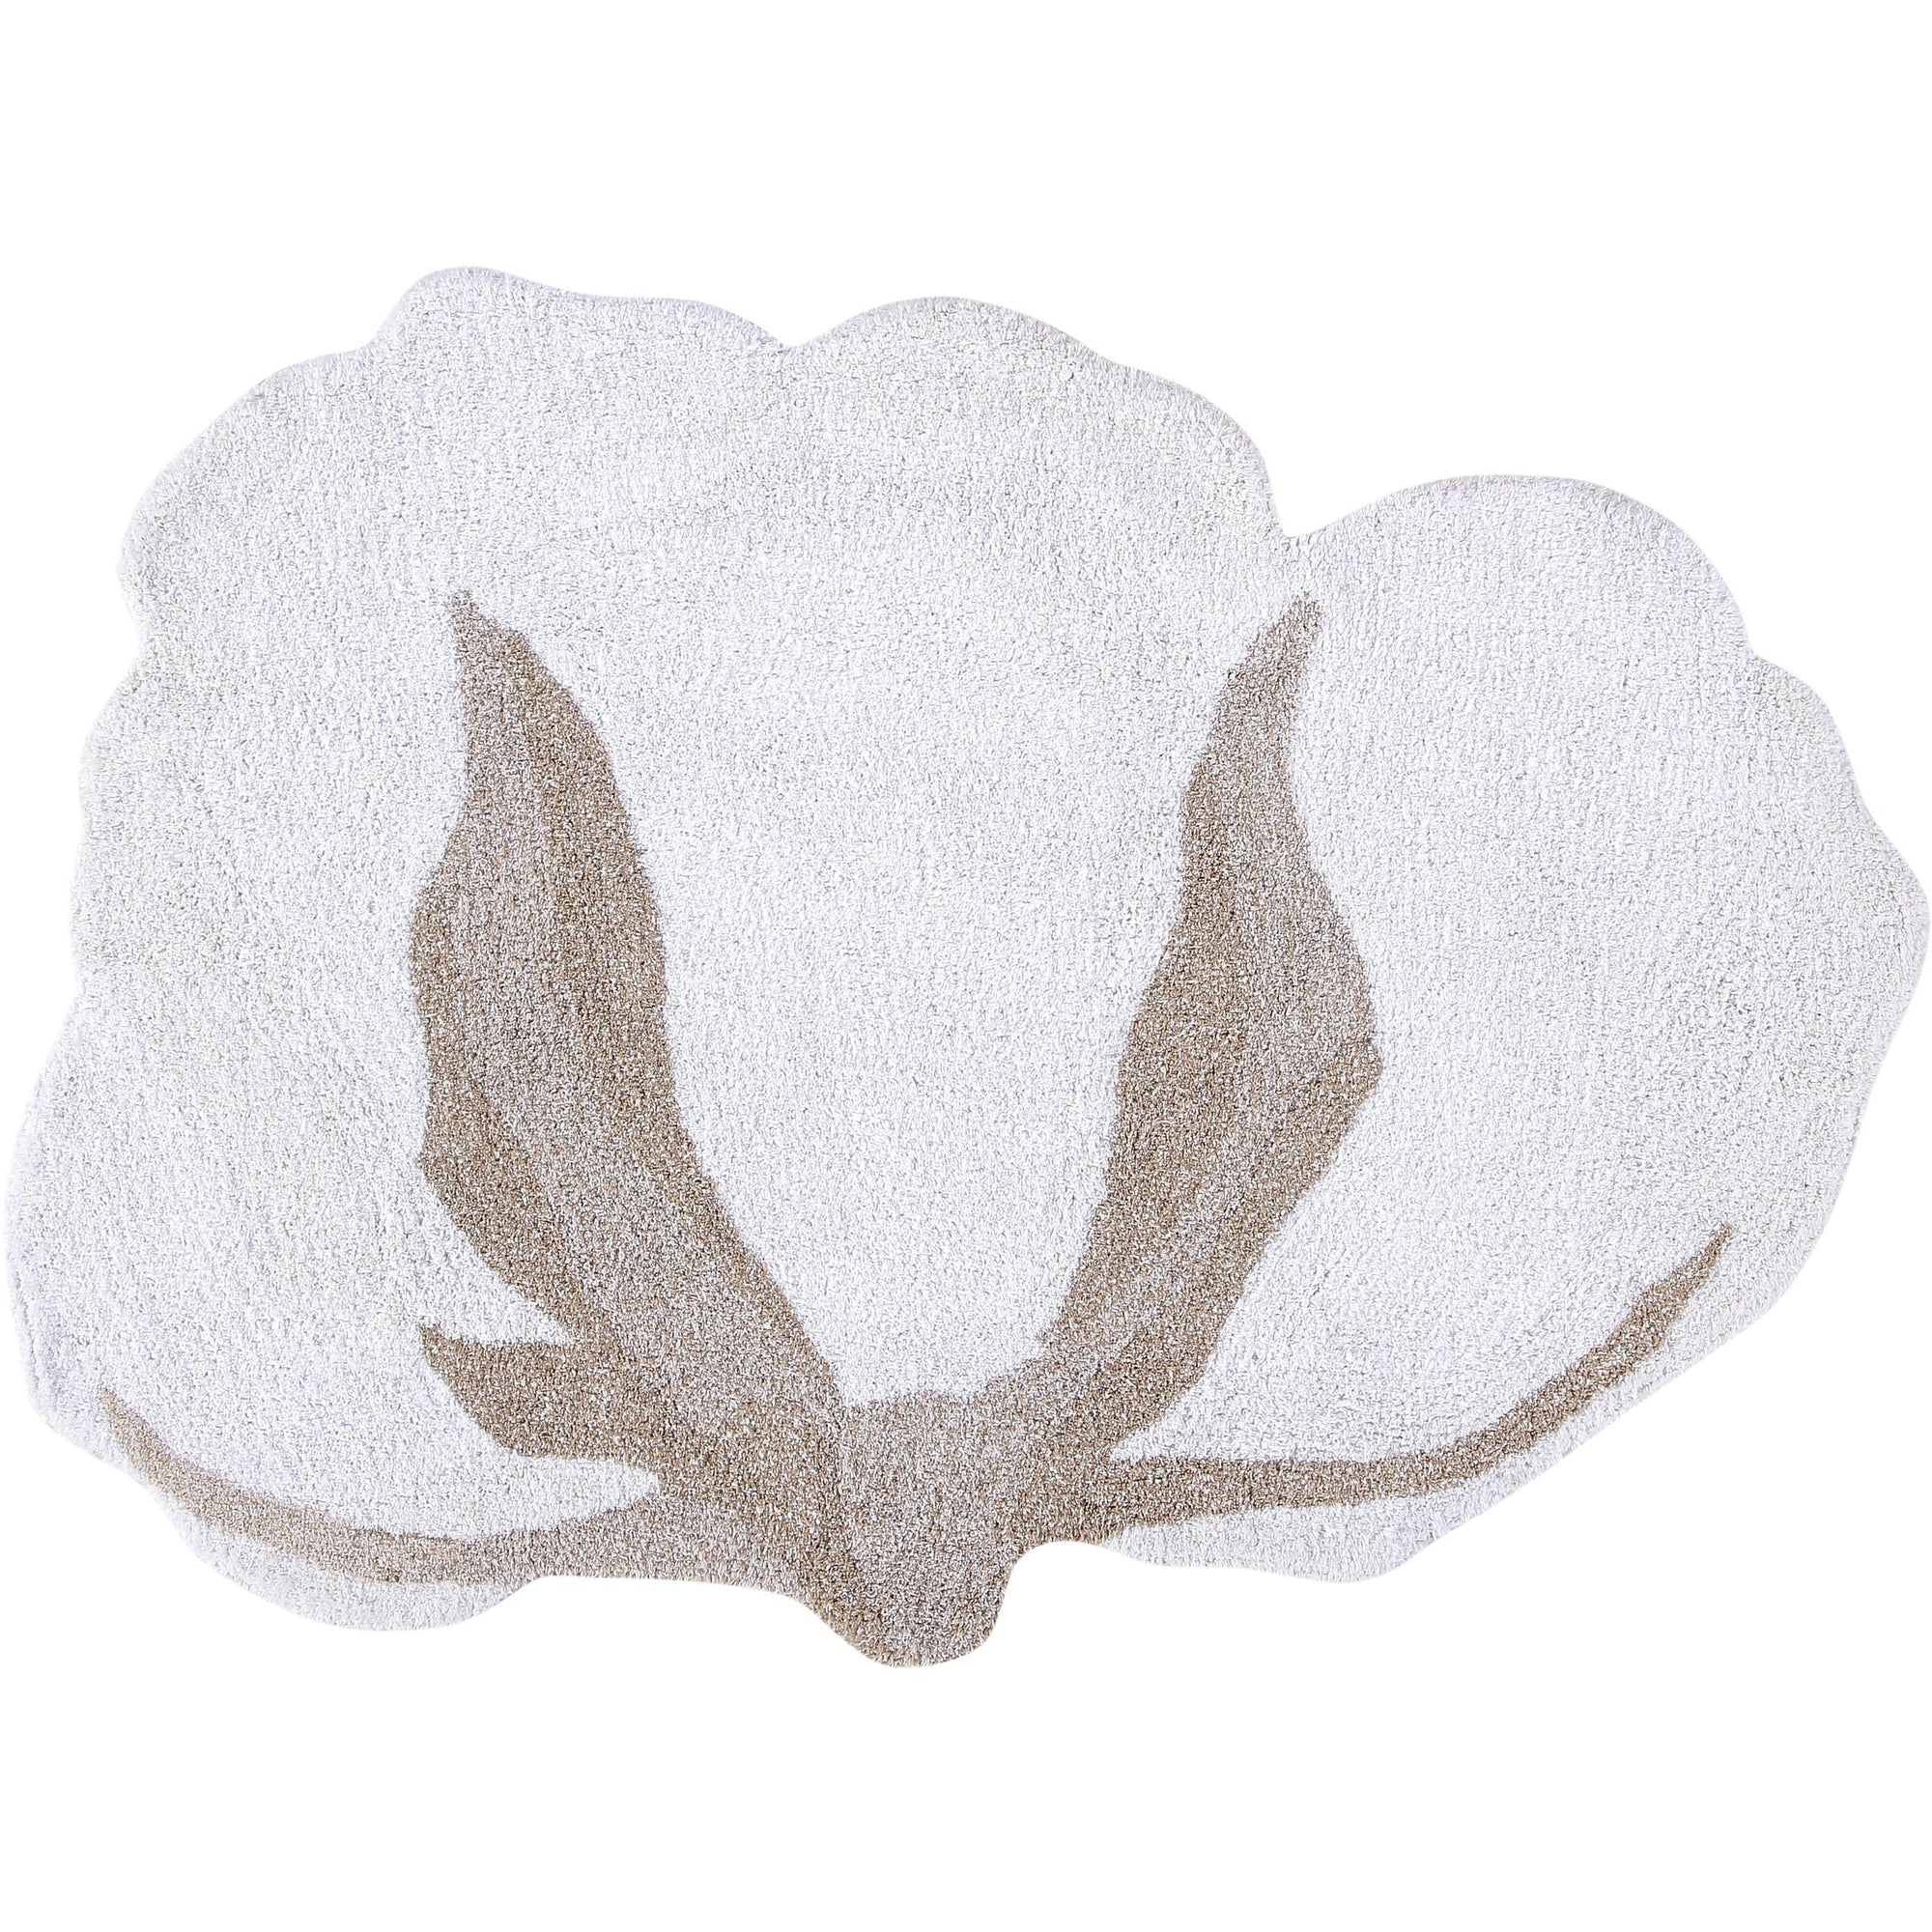 Rugs by Roo | Lorena Canals Cotton Flower Machine Washable Area Rug-C-COT-FLOWER